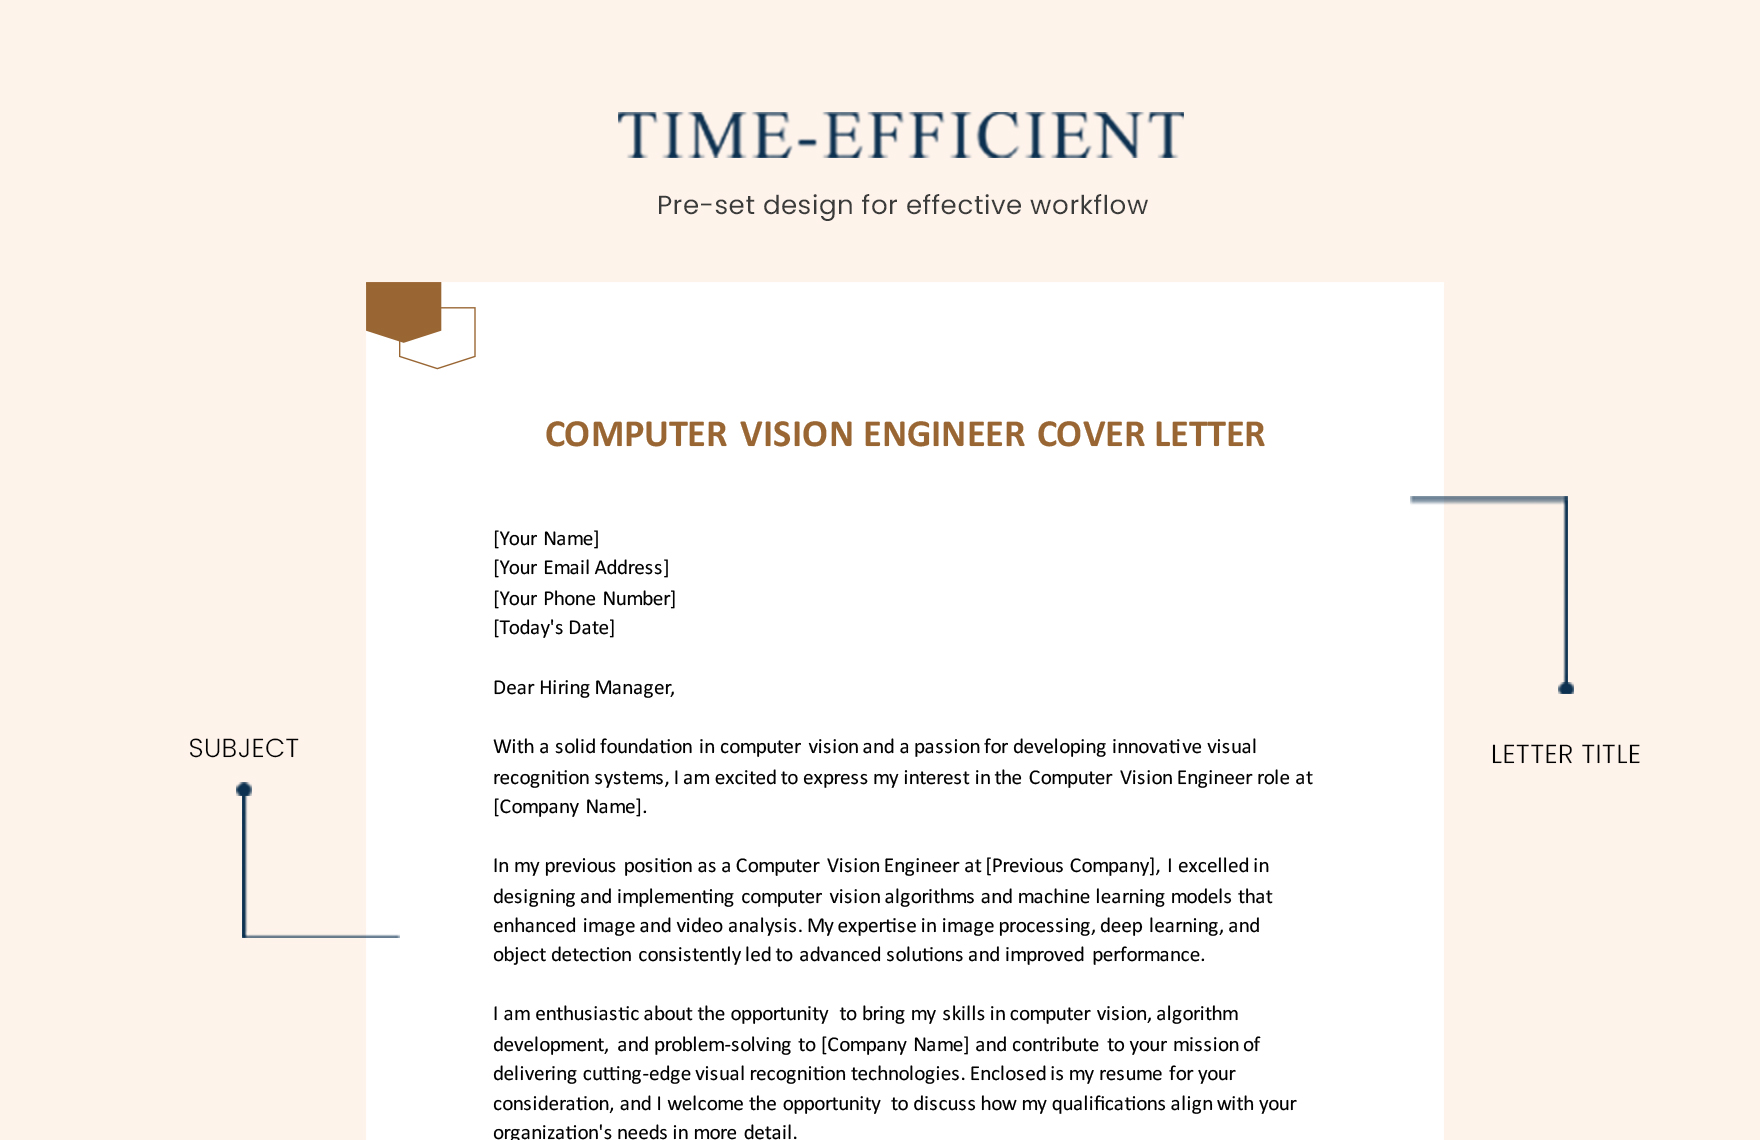 Computer Vision Engineer Cover Letter